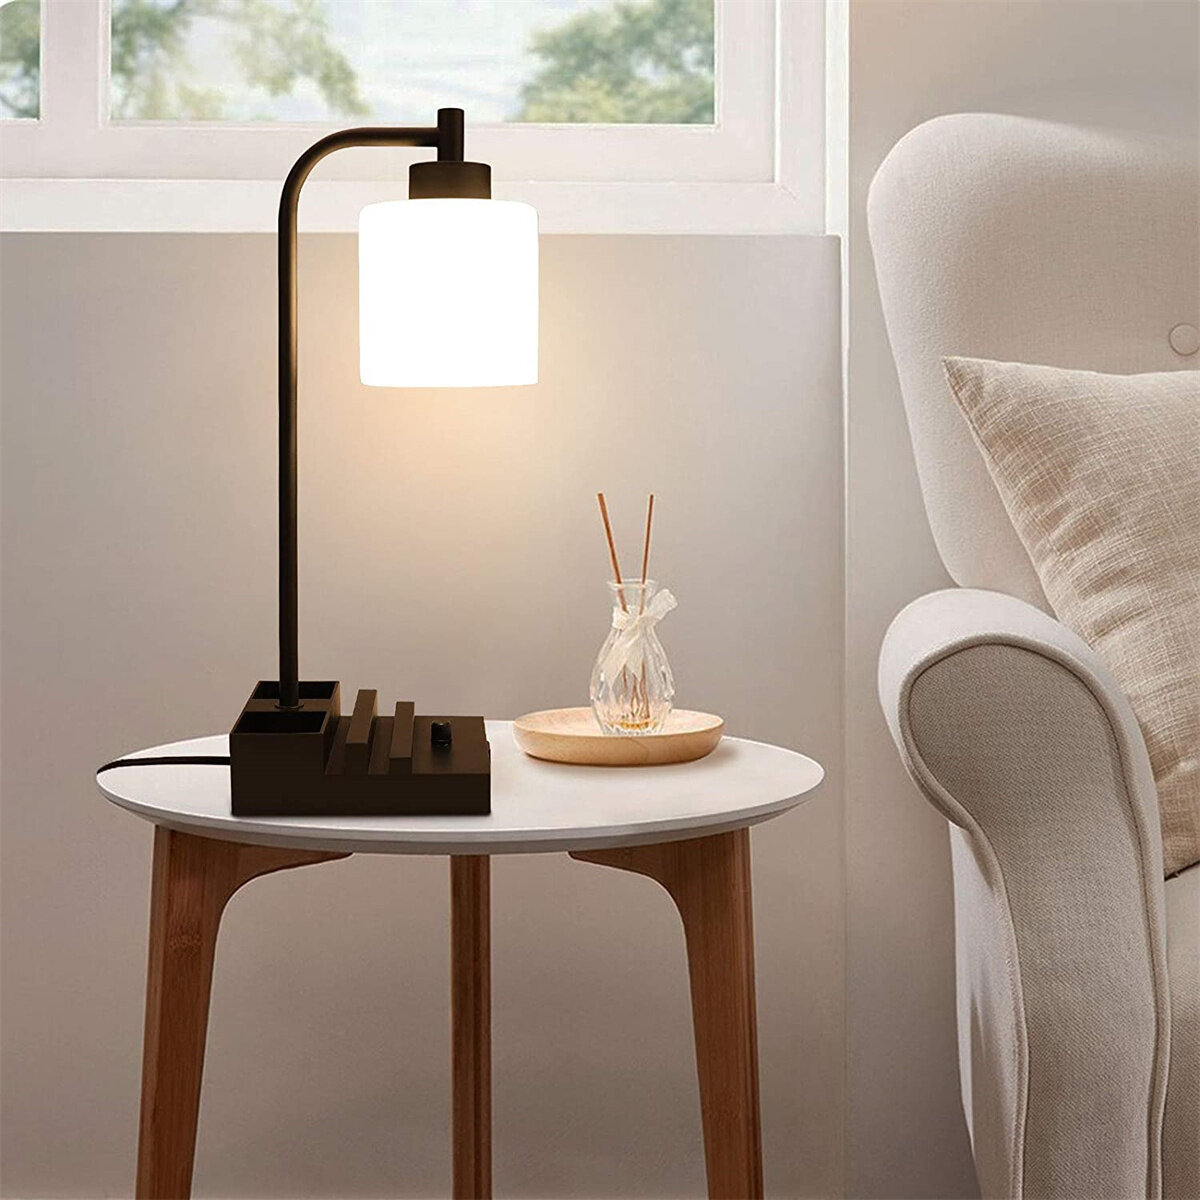 Glass Shade Farmhouse Lamp for Bedroom Living Room Office Industrial Table Lamp LED Bulb Included Stepless Dimmable Vintage Bedside Nightstand Lamp with 2 USB Ports and AC Power Outlet 